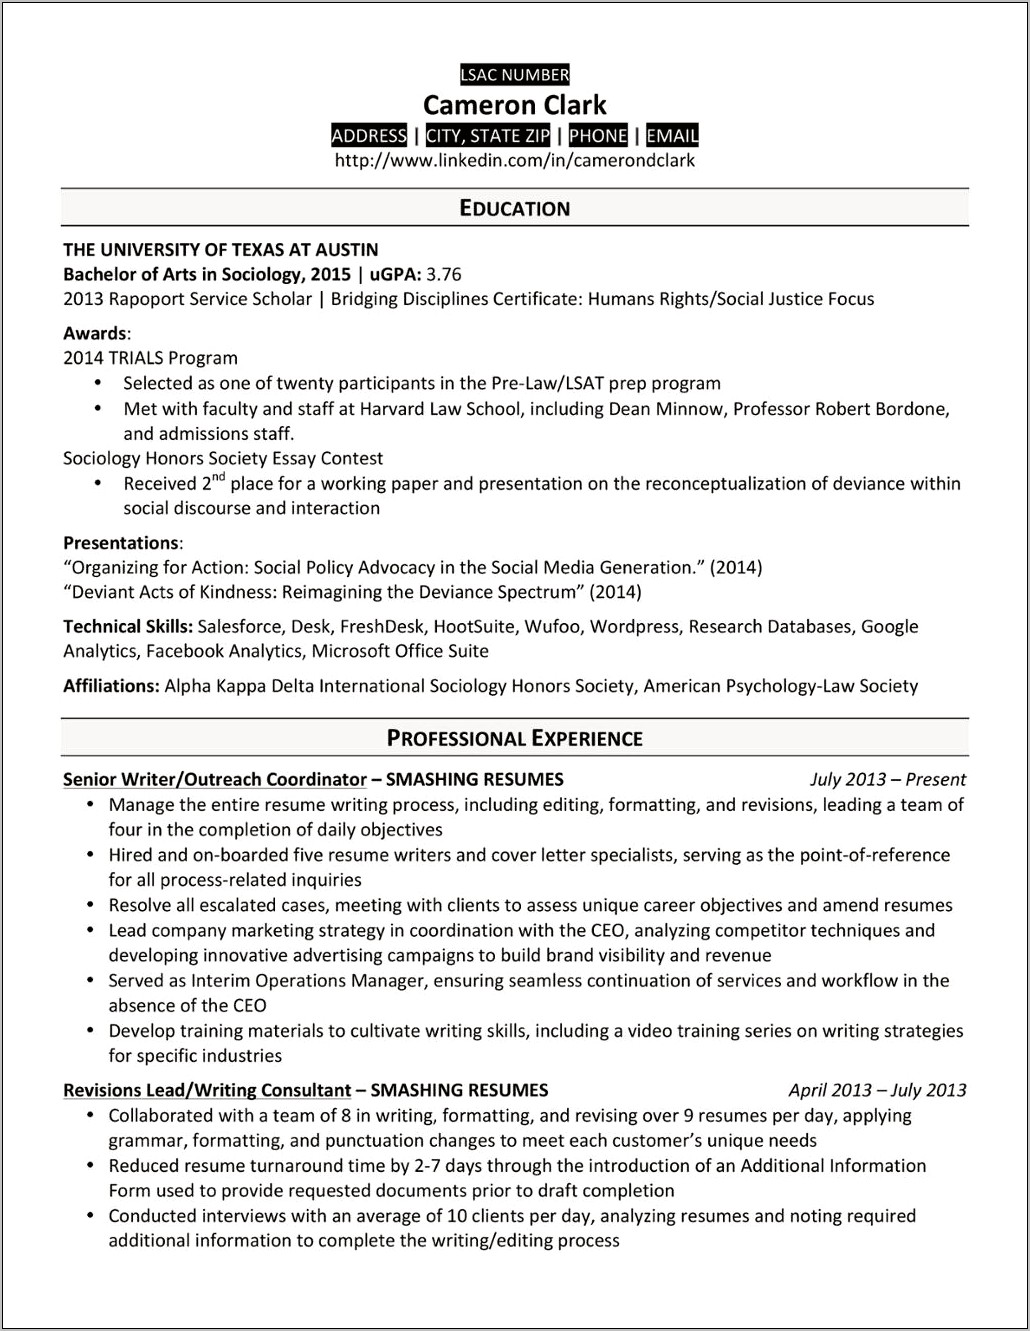 Study Abroad In Law School Resume